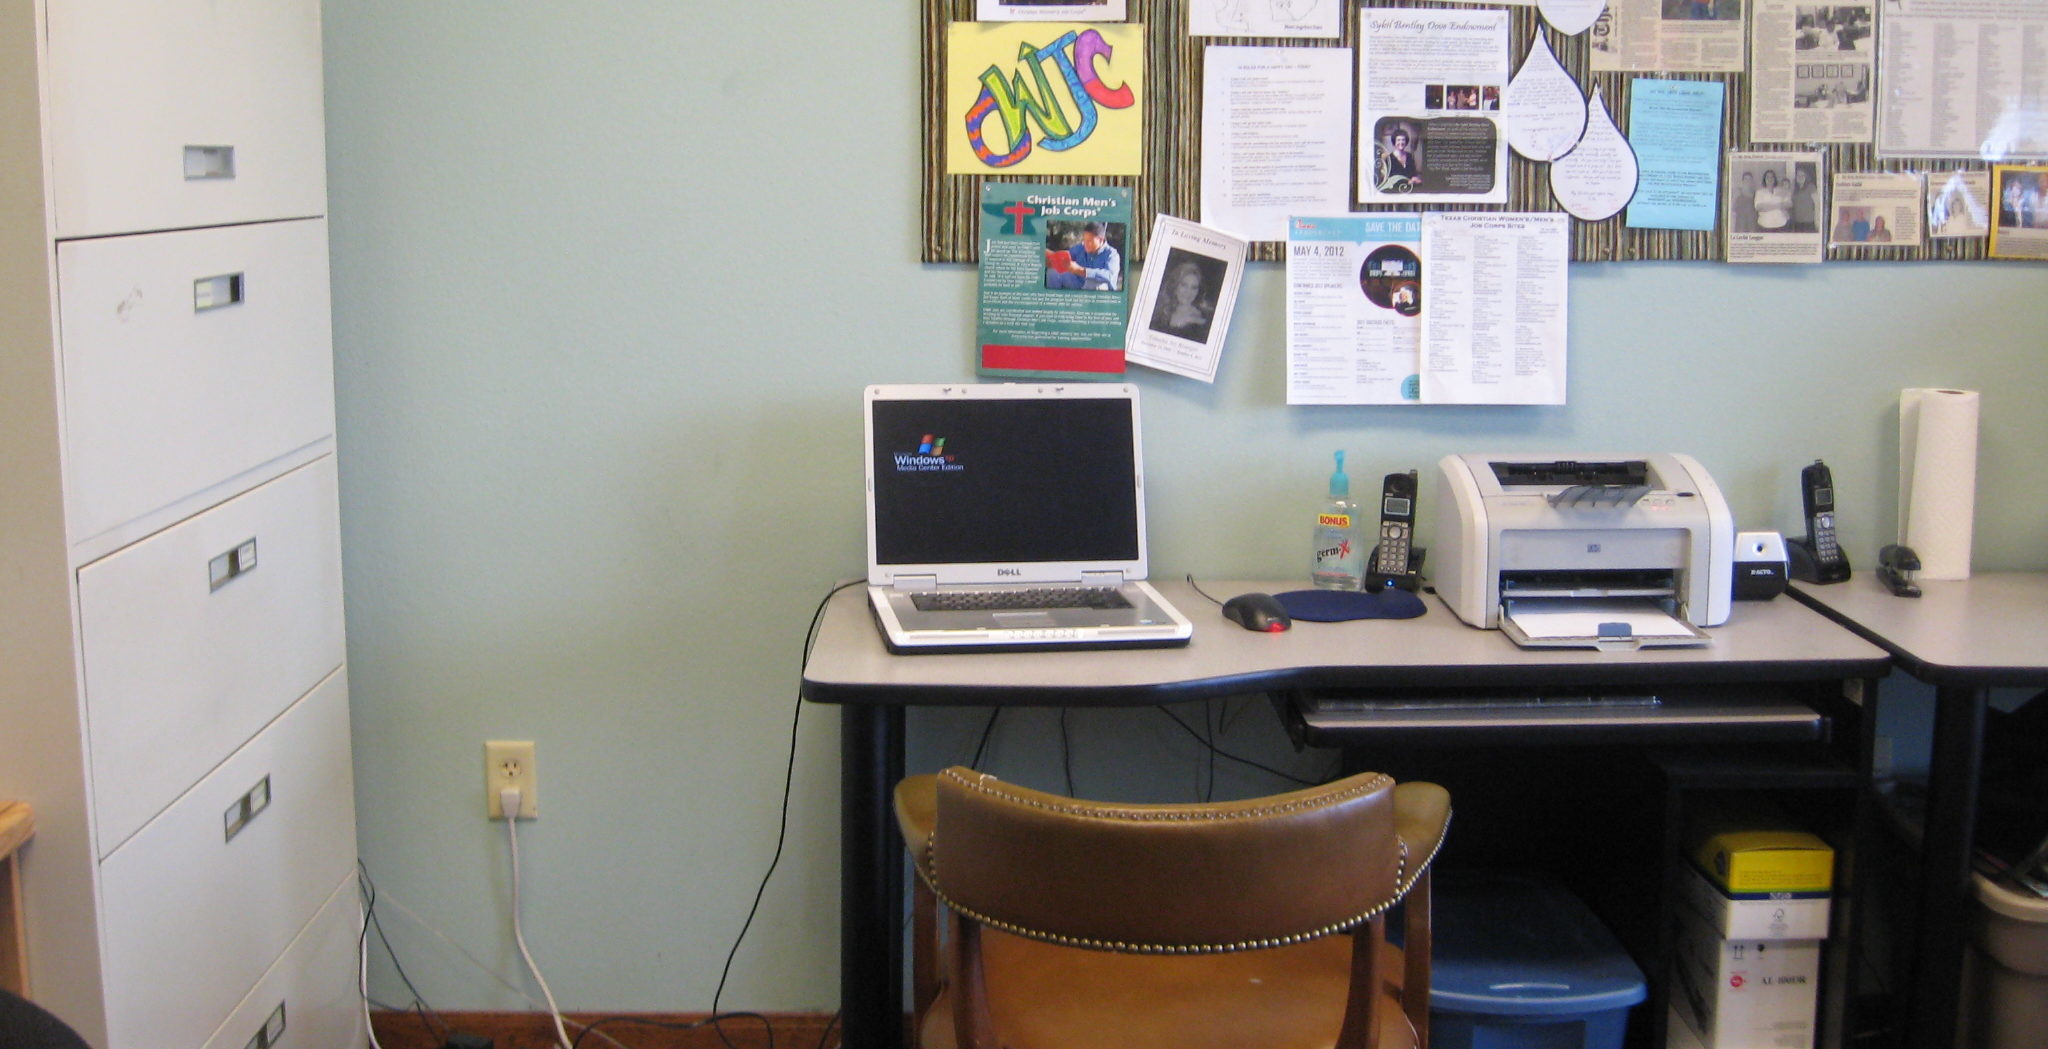 Picture of an office work space